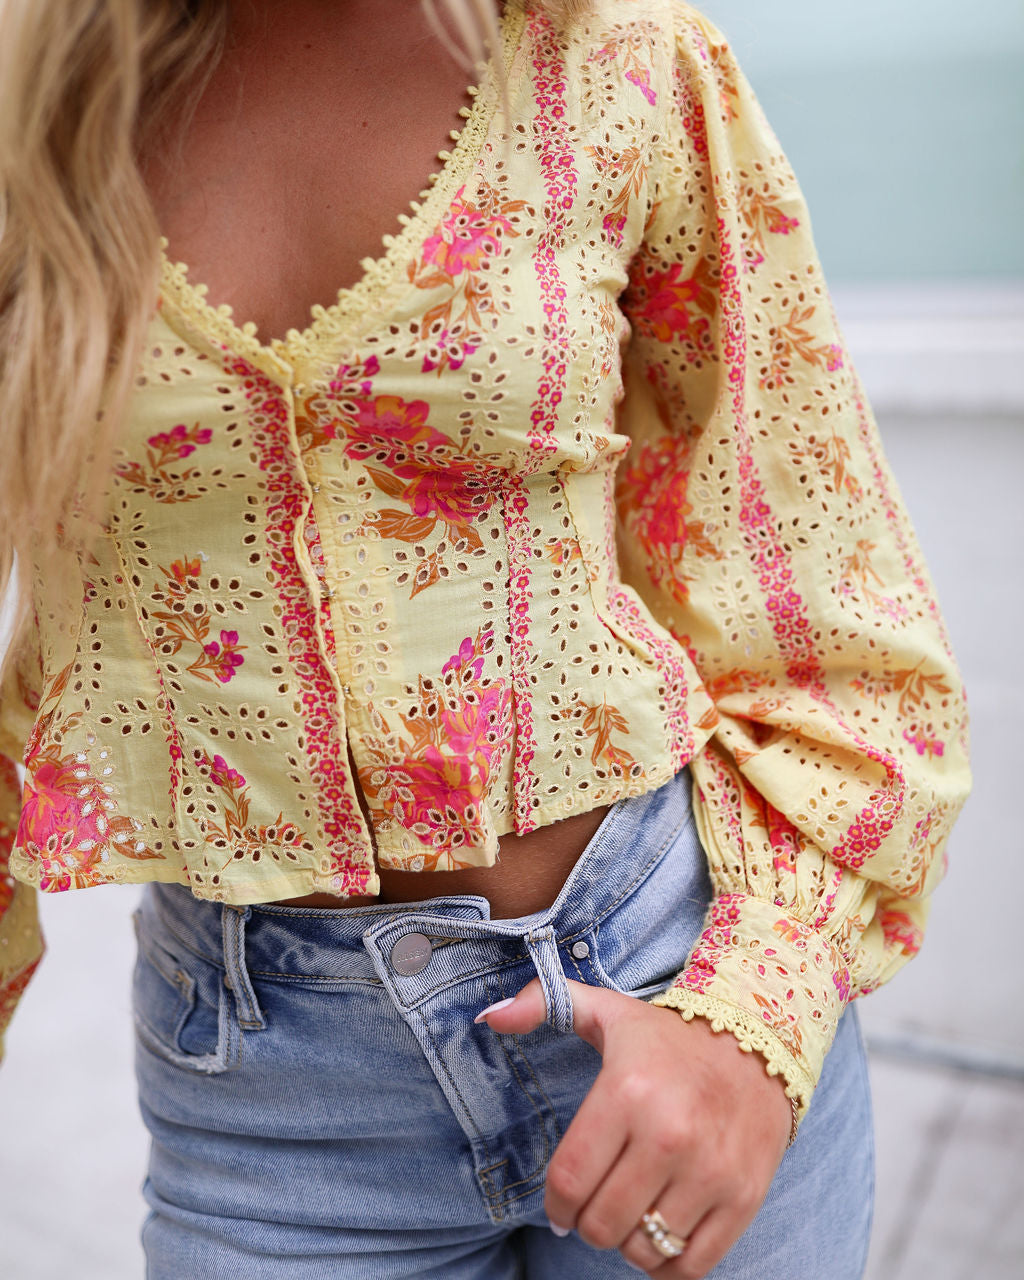 Free People Blossom Eyelet Top - Squash Blossom Boutique